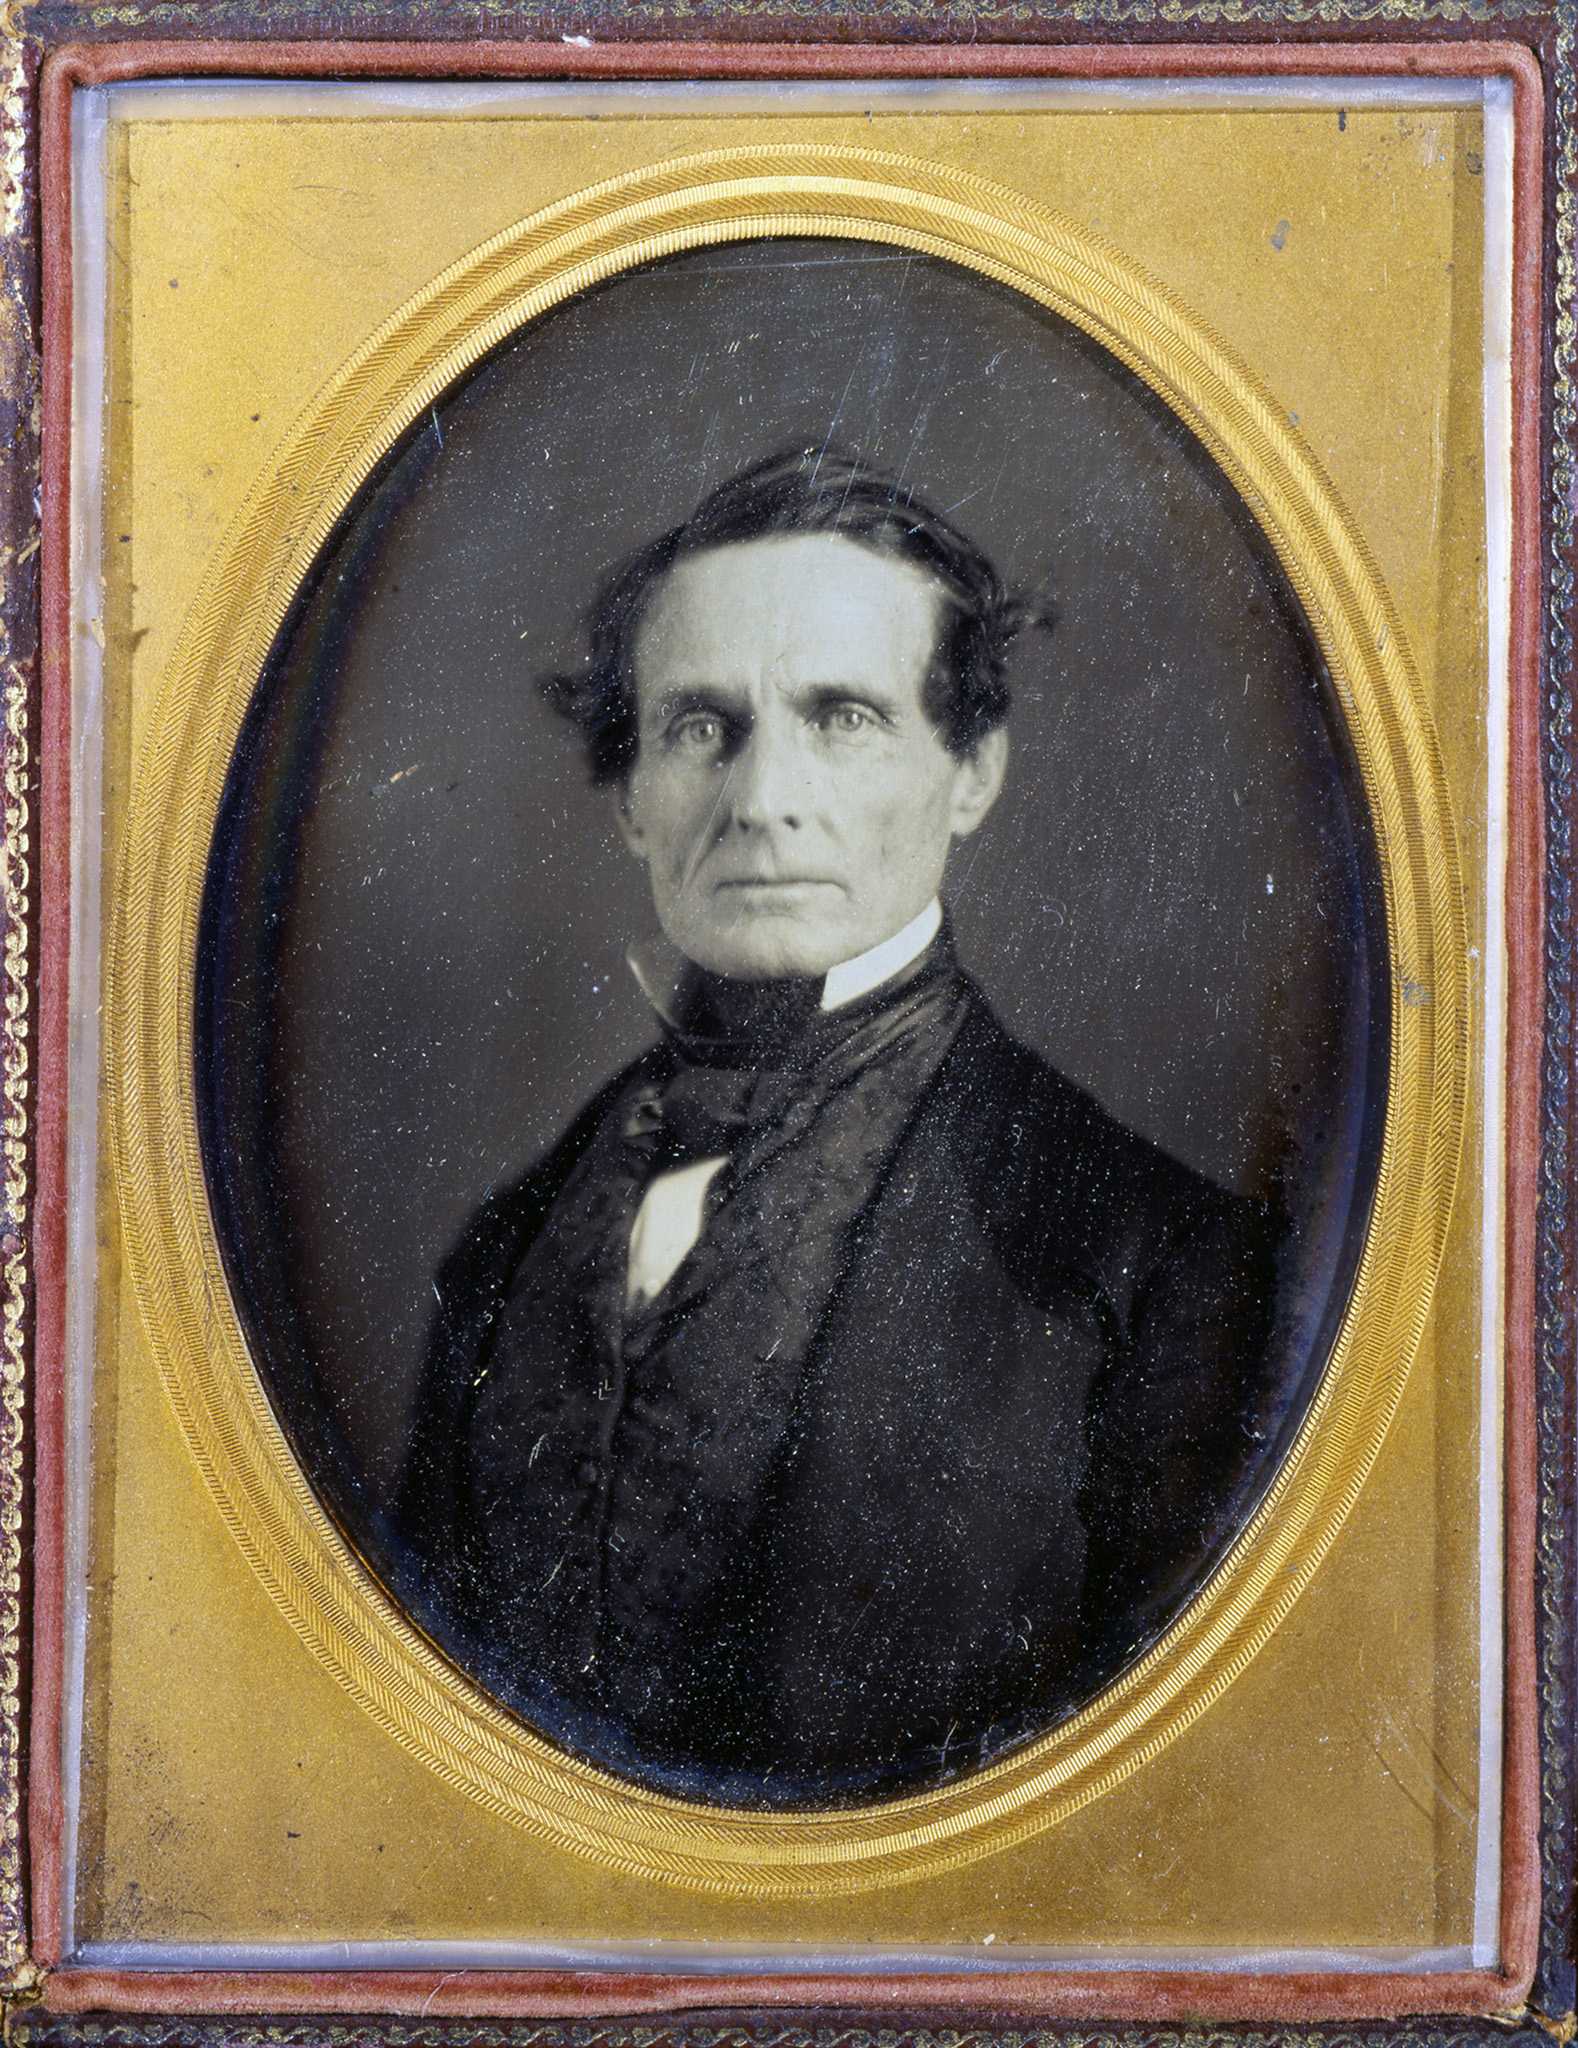 Daguerreotype image of Jefferson Davis in a gold and brown frame